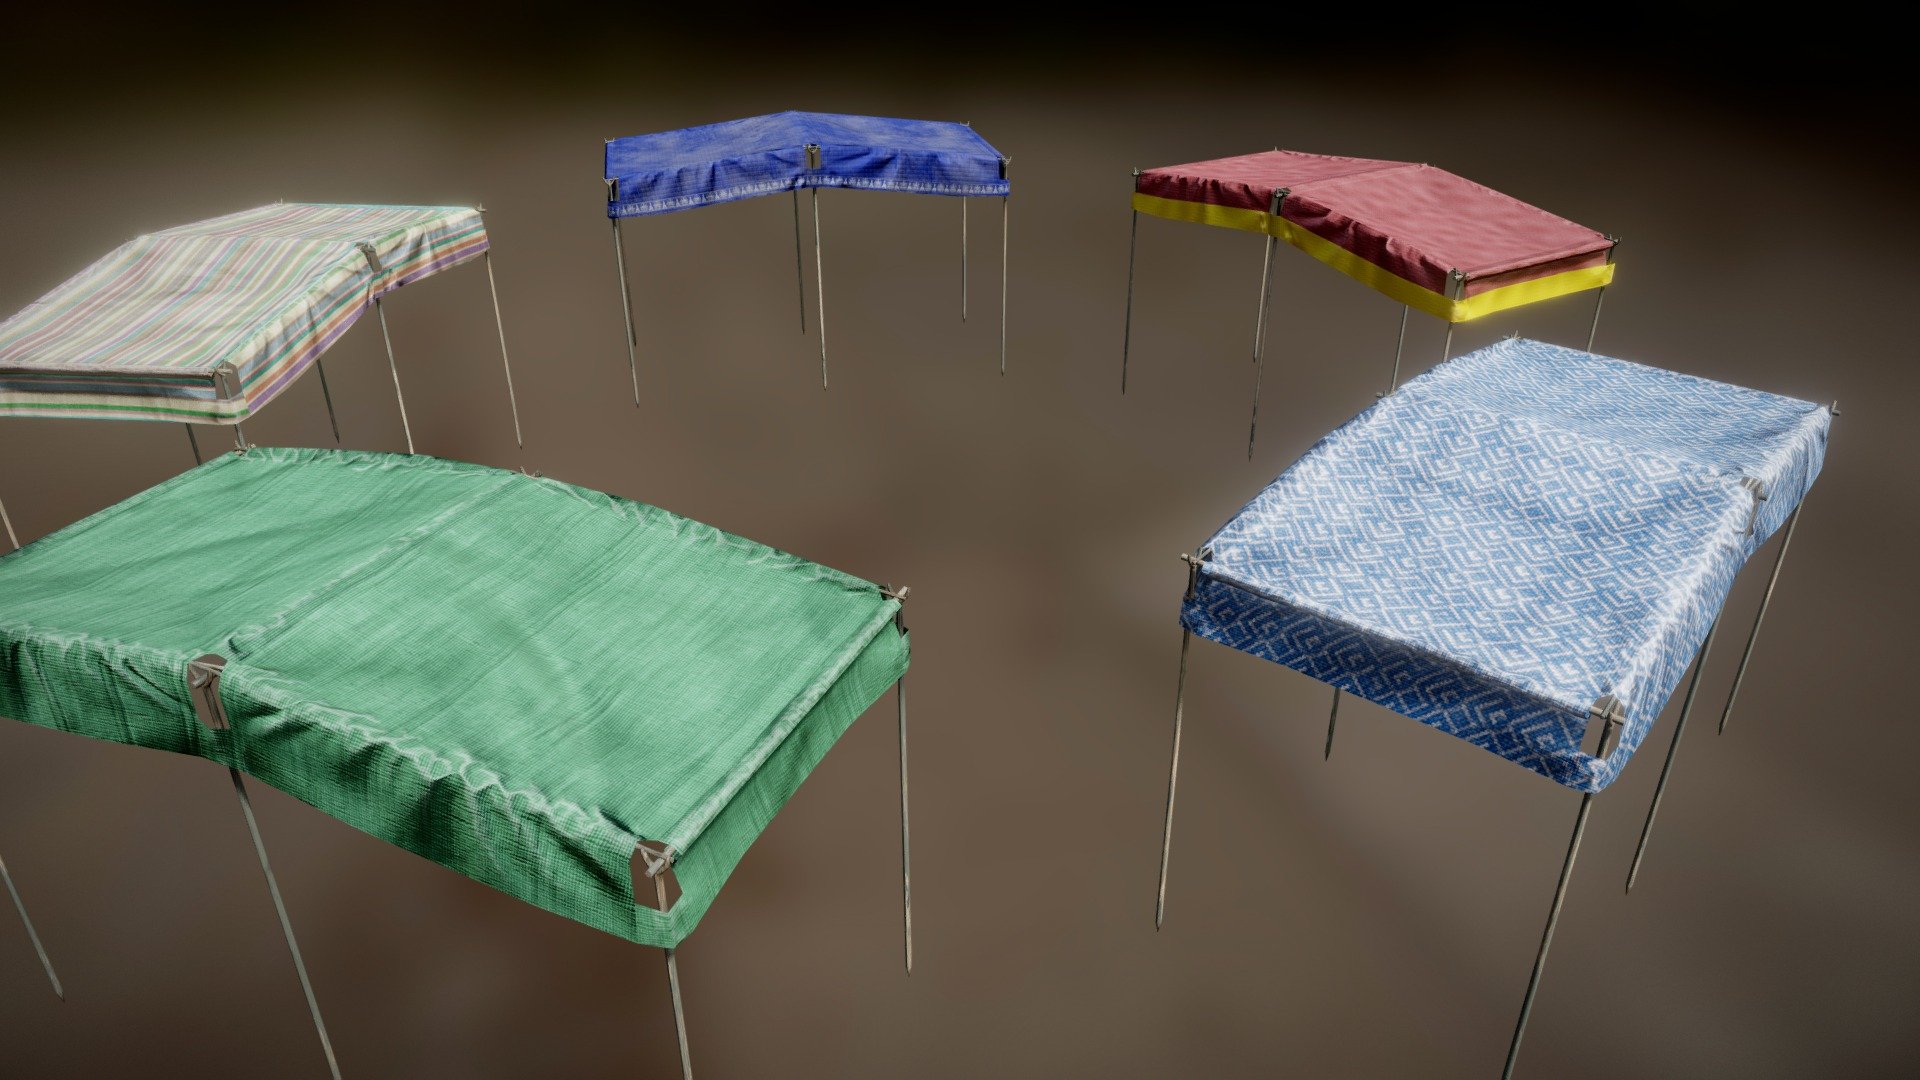 Some low poly shade tents for a marketplace vendor. 5 different fabric types.
Their design is based on visual research I've been doing into ancient Greek &ldquo;Agoras